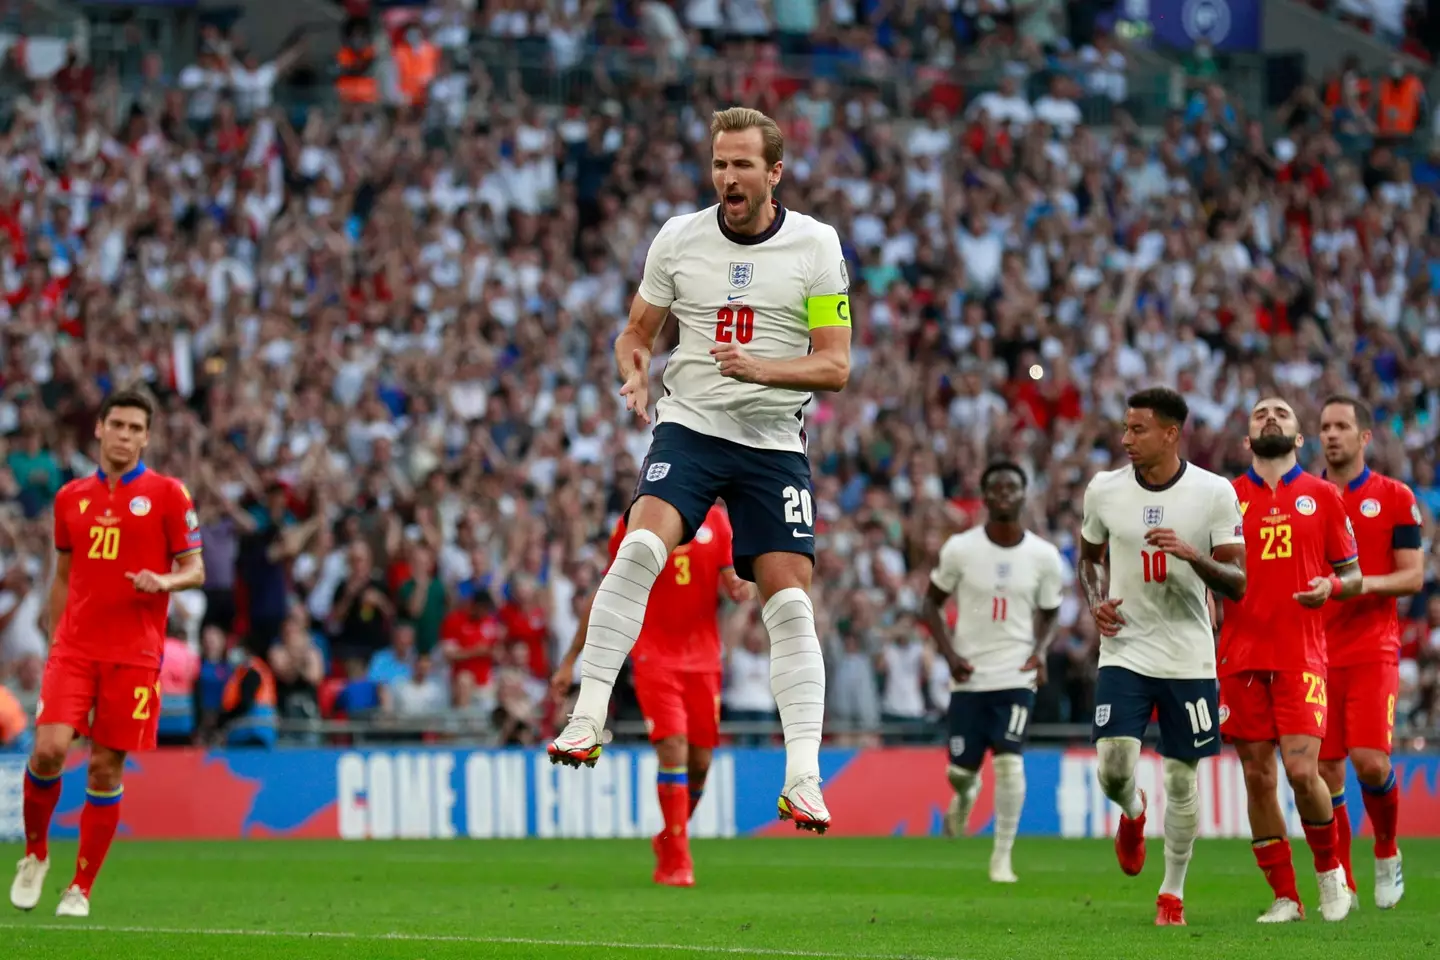 Harry Kane is continuing to close on Wayne Rooney’s national record of 53 goals